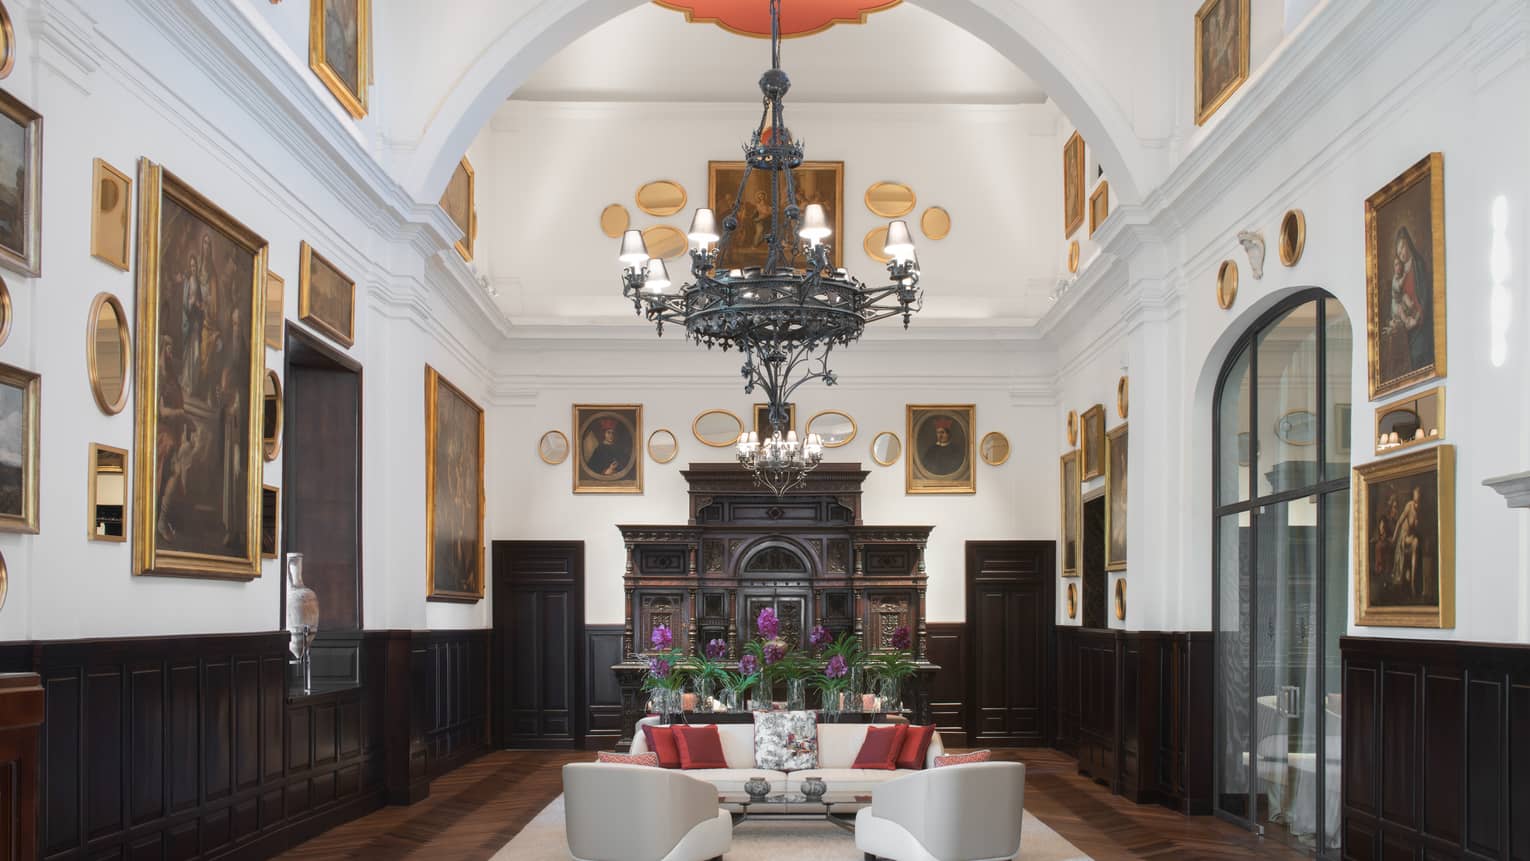 Sala Museo with artwork lining both walls, white leather furniture, high ceilings, wrought iron chandelier, fireplace